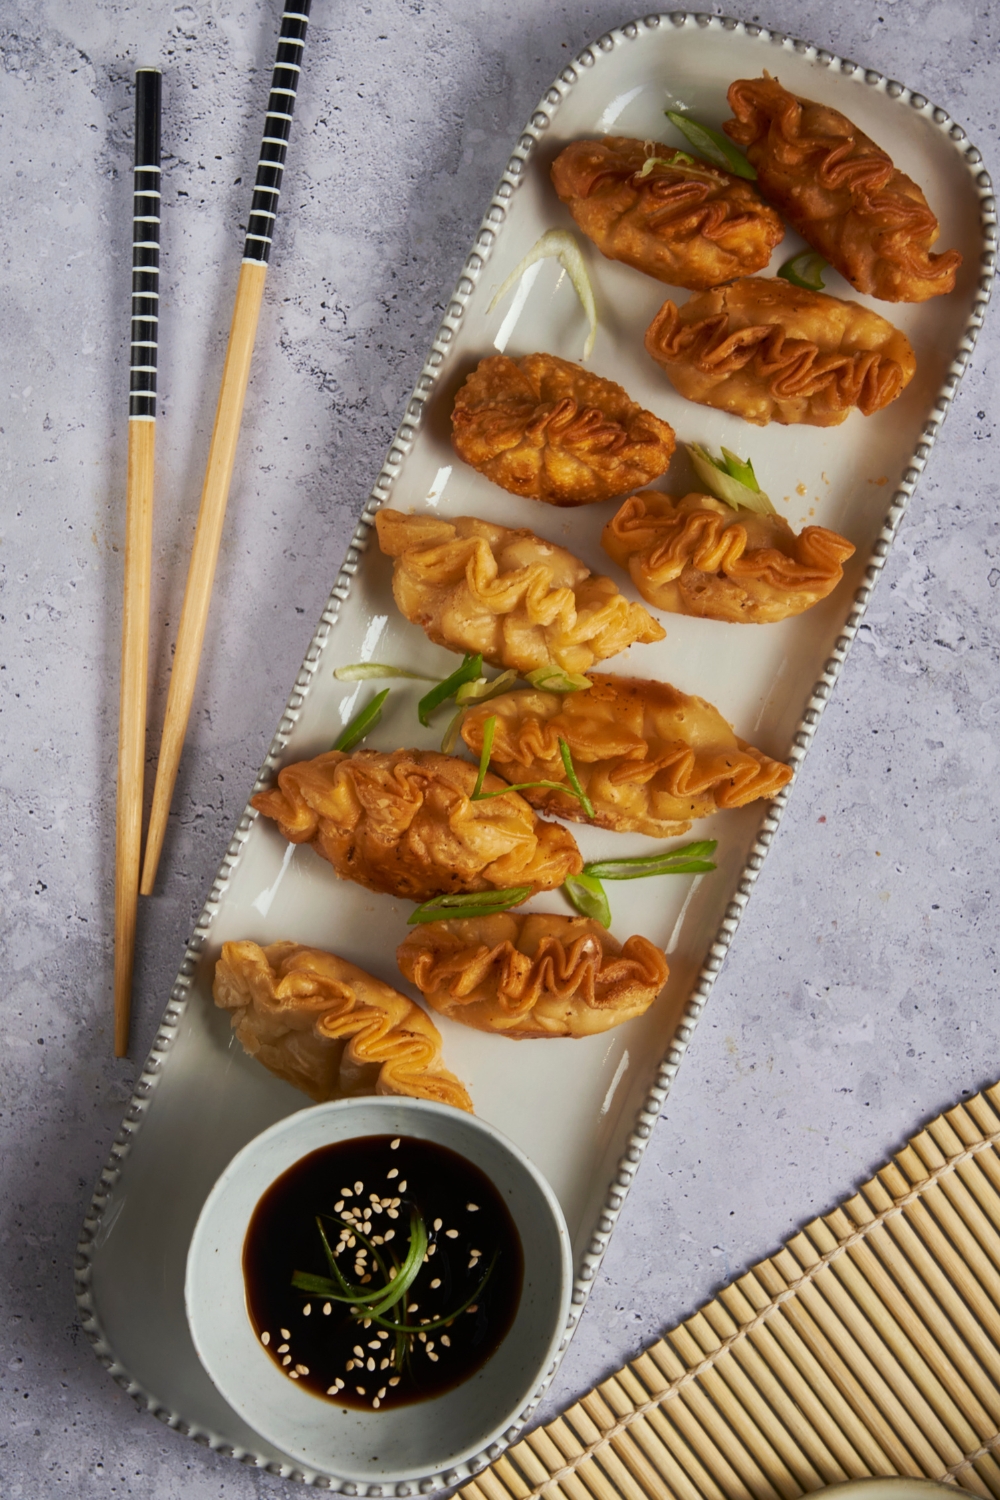 A serving plate with fried crab rangoon and a soy dipping sauce. Chop sticks are sitting next to the plate.